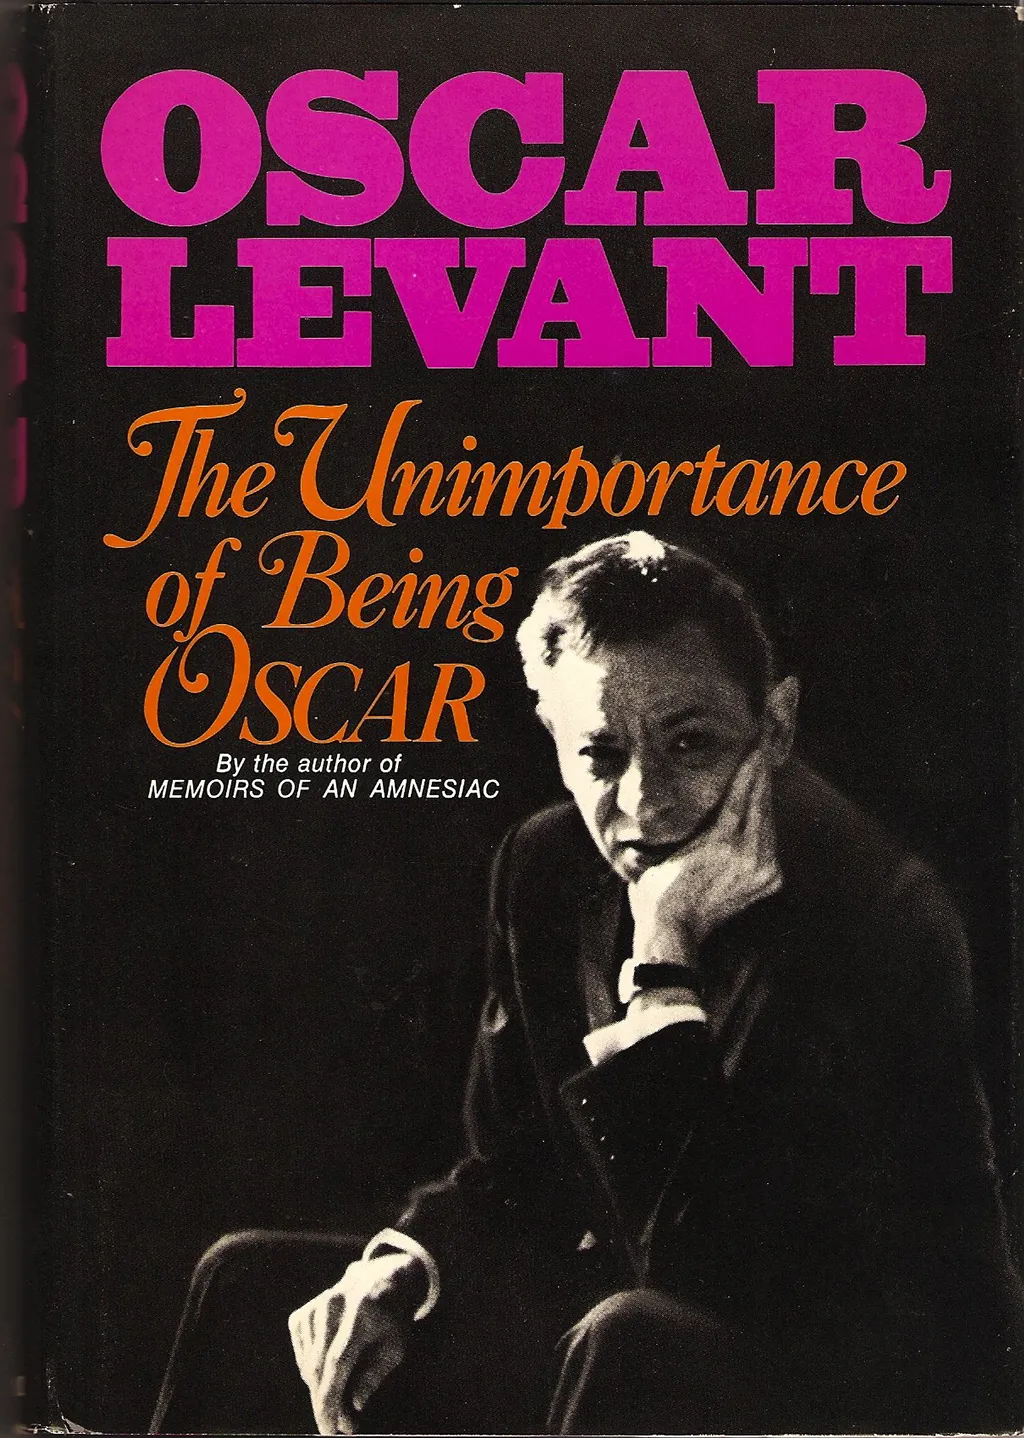 the unimportance of being oscar, books every man should read